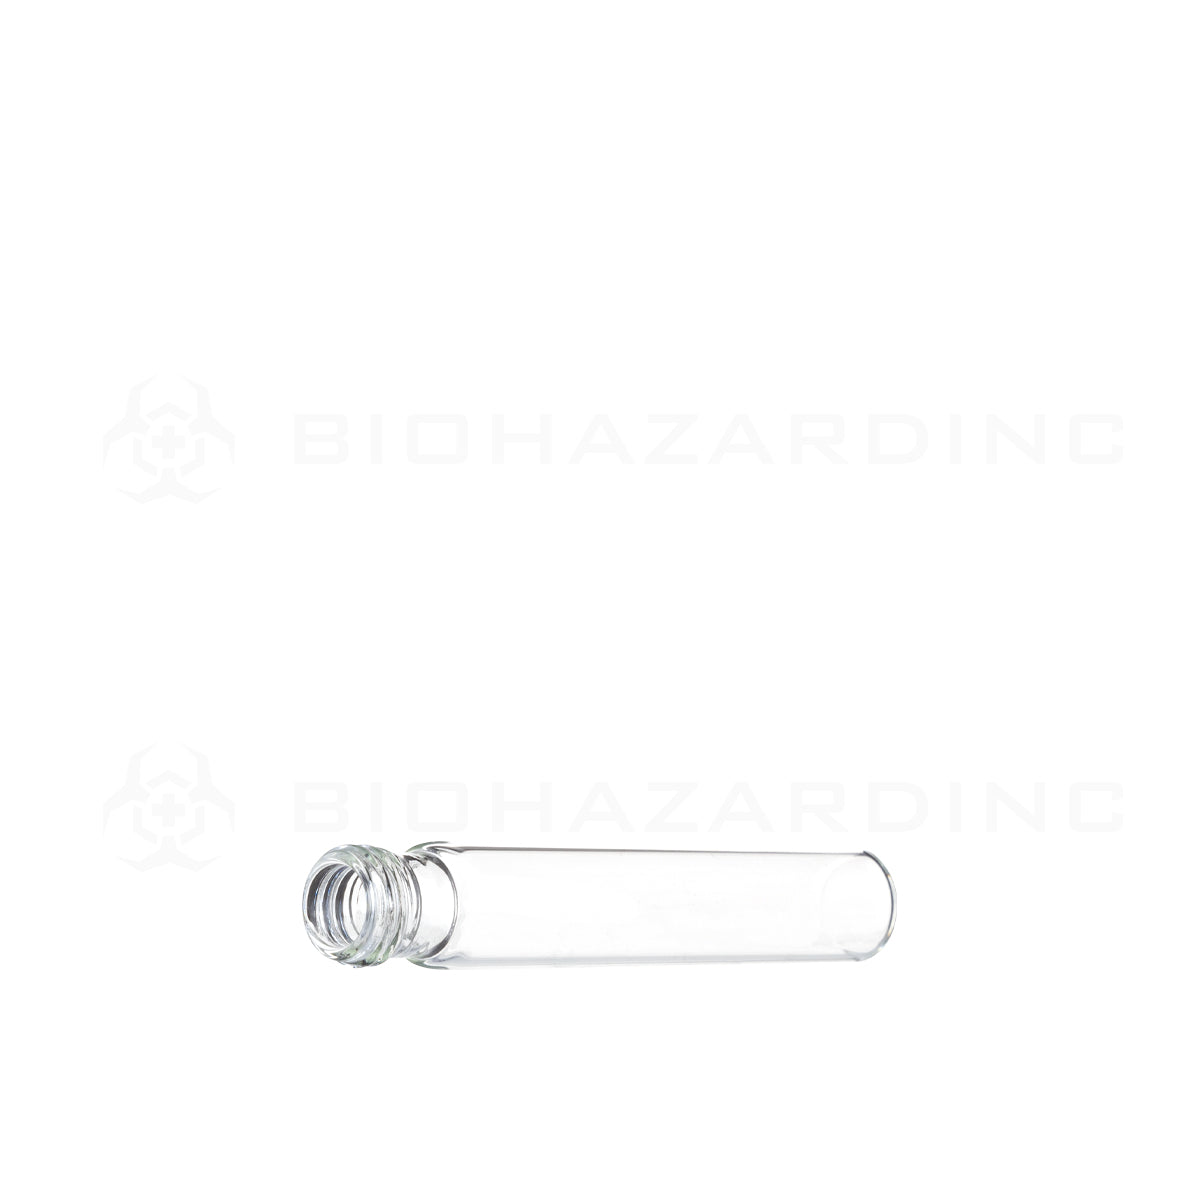 Glass Vial | Clear Glass Pre-Roll Tube | 15mm - 95mm - 420 Count Glass Vial Biohazard Inc   